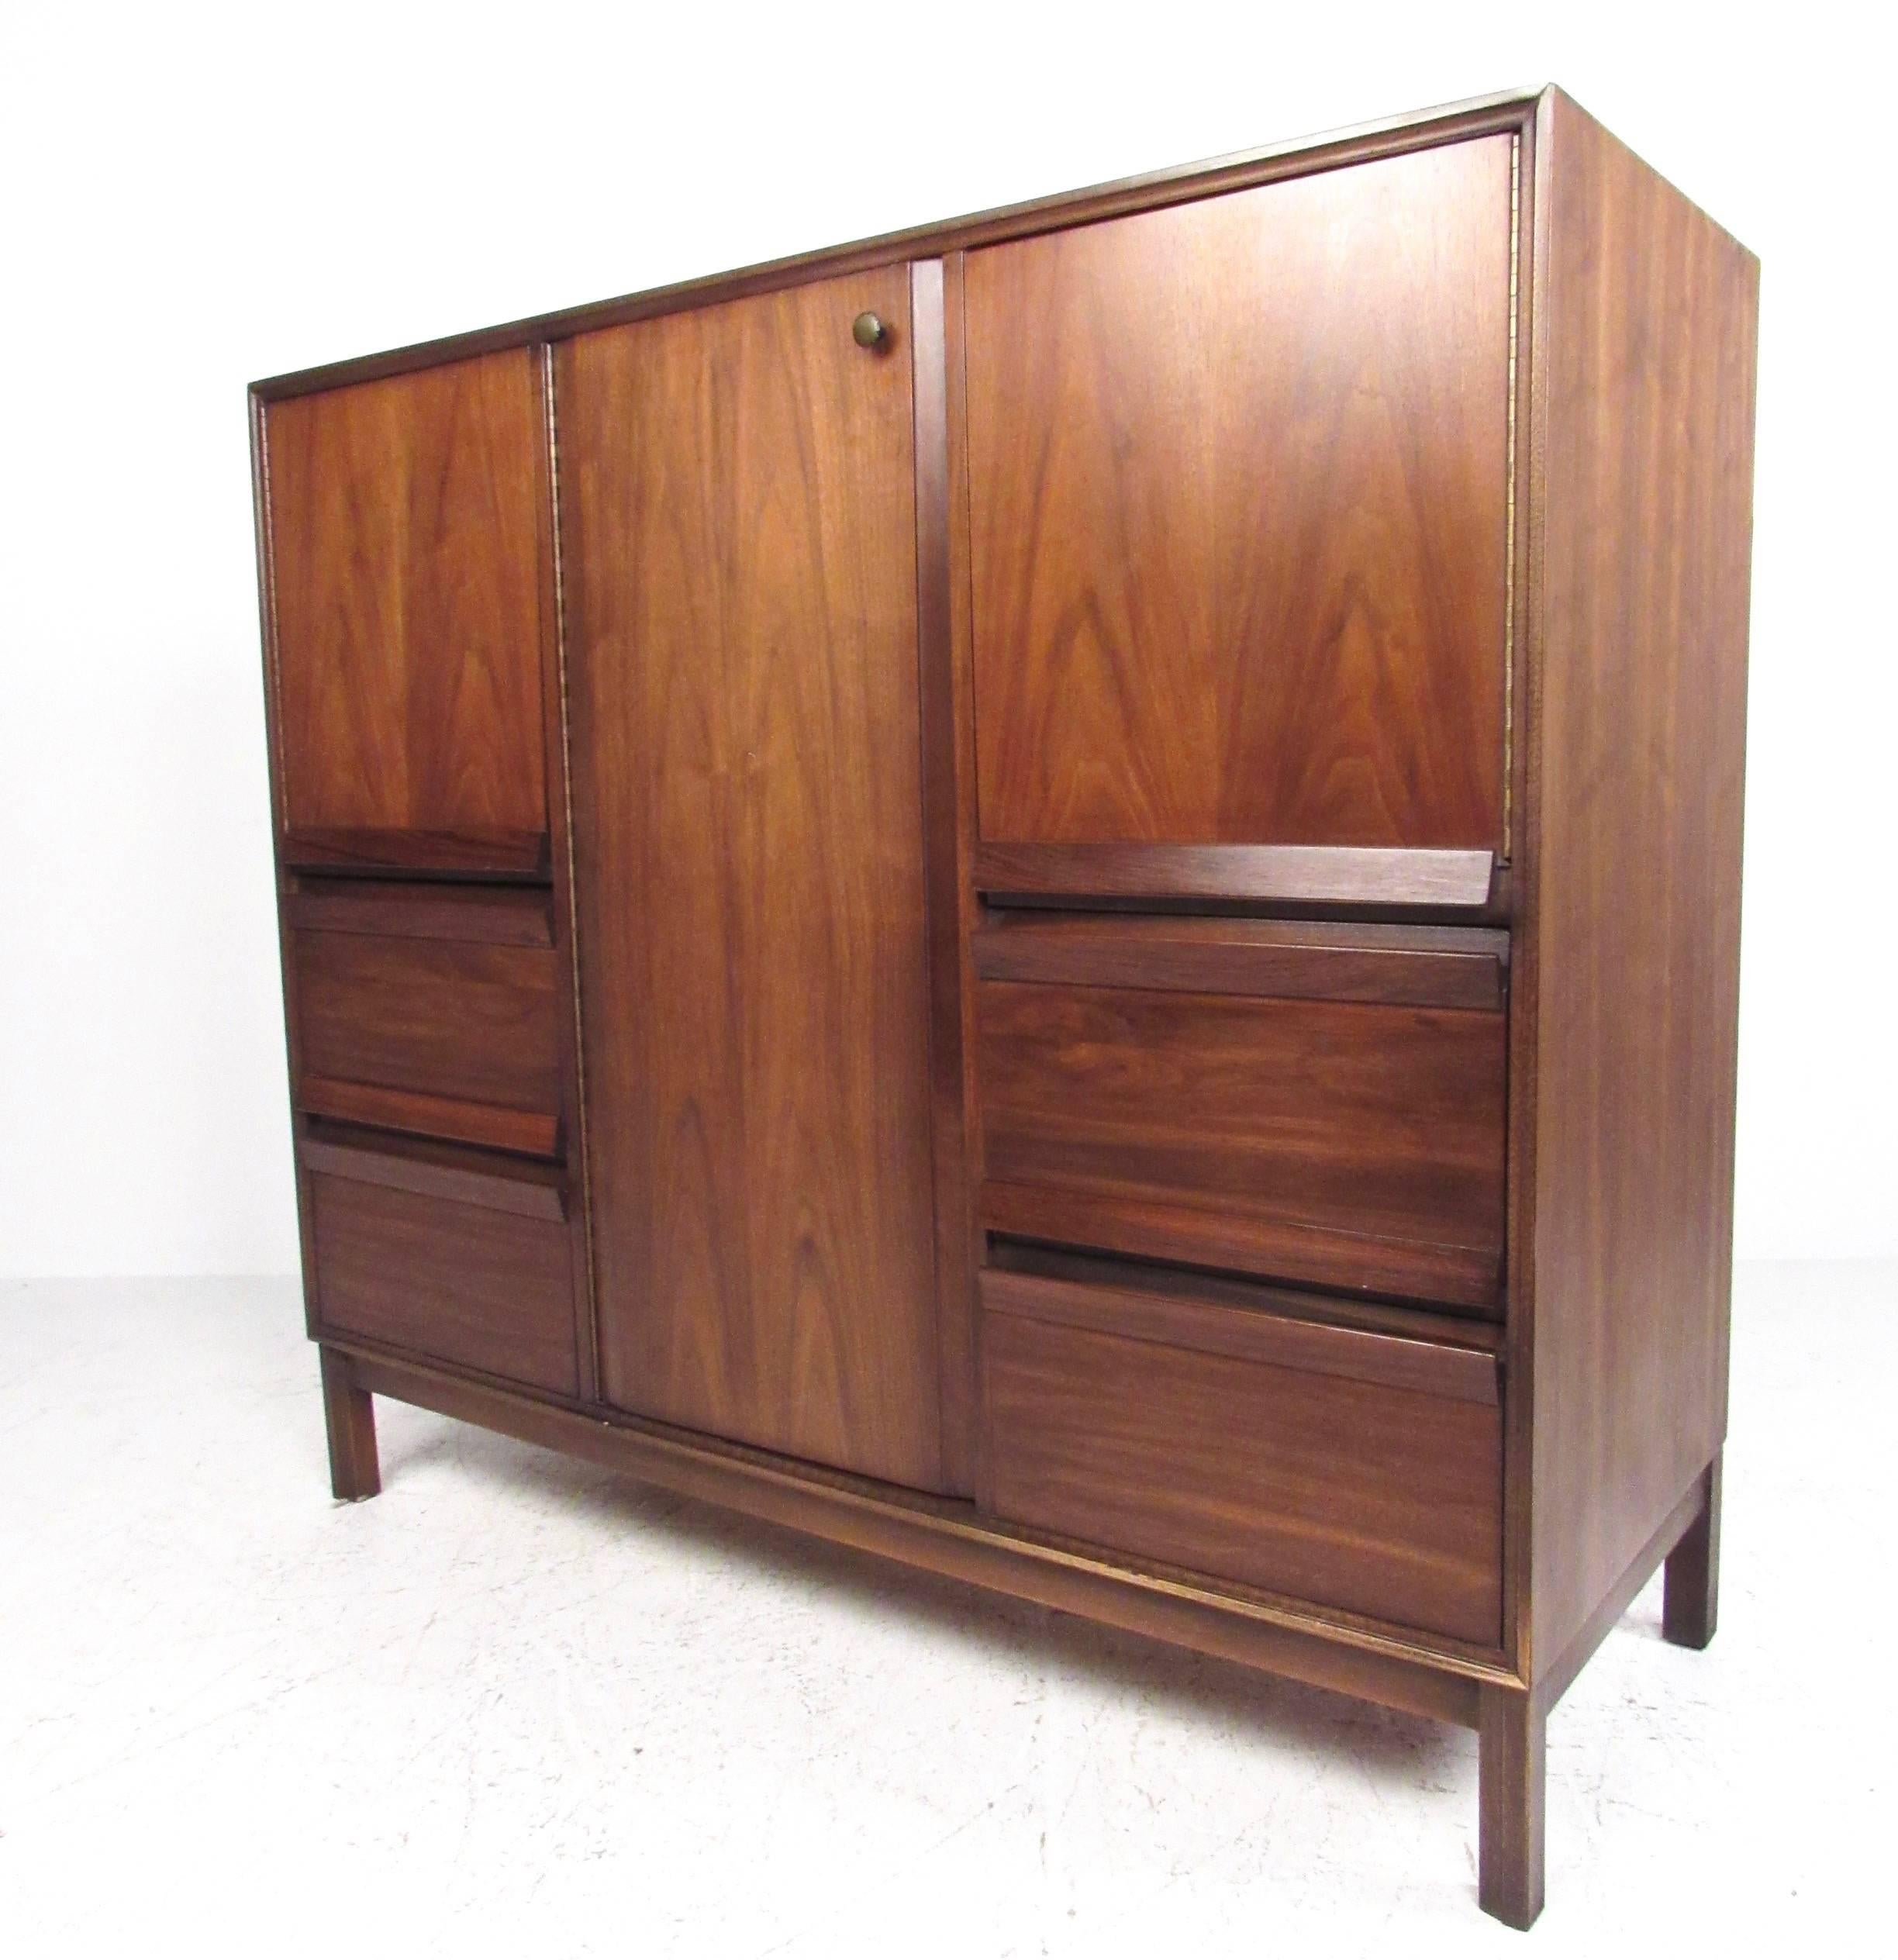 This vintage dresser features beautiful walnut finish with plenty of storage for any setting. Spacious bottom drawers are balanced by shelved storage cabinets, all with unique pulls. This large armoire is perfect for bedroom storage; please confirm